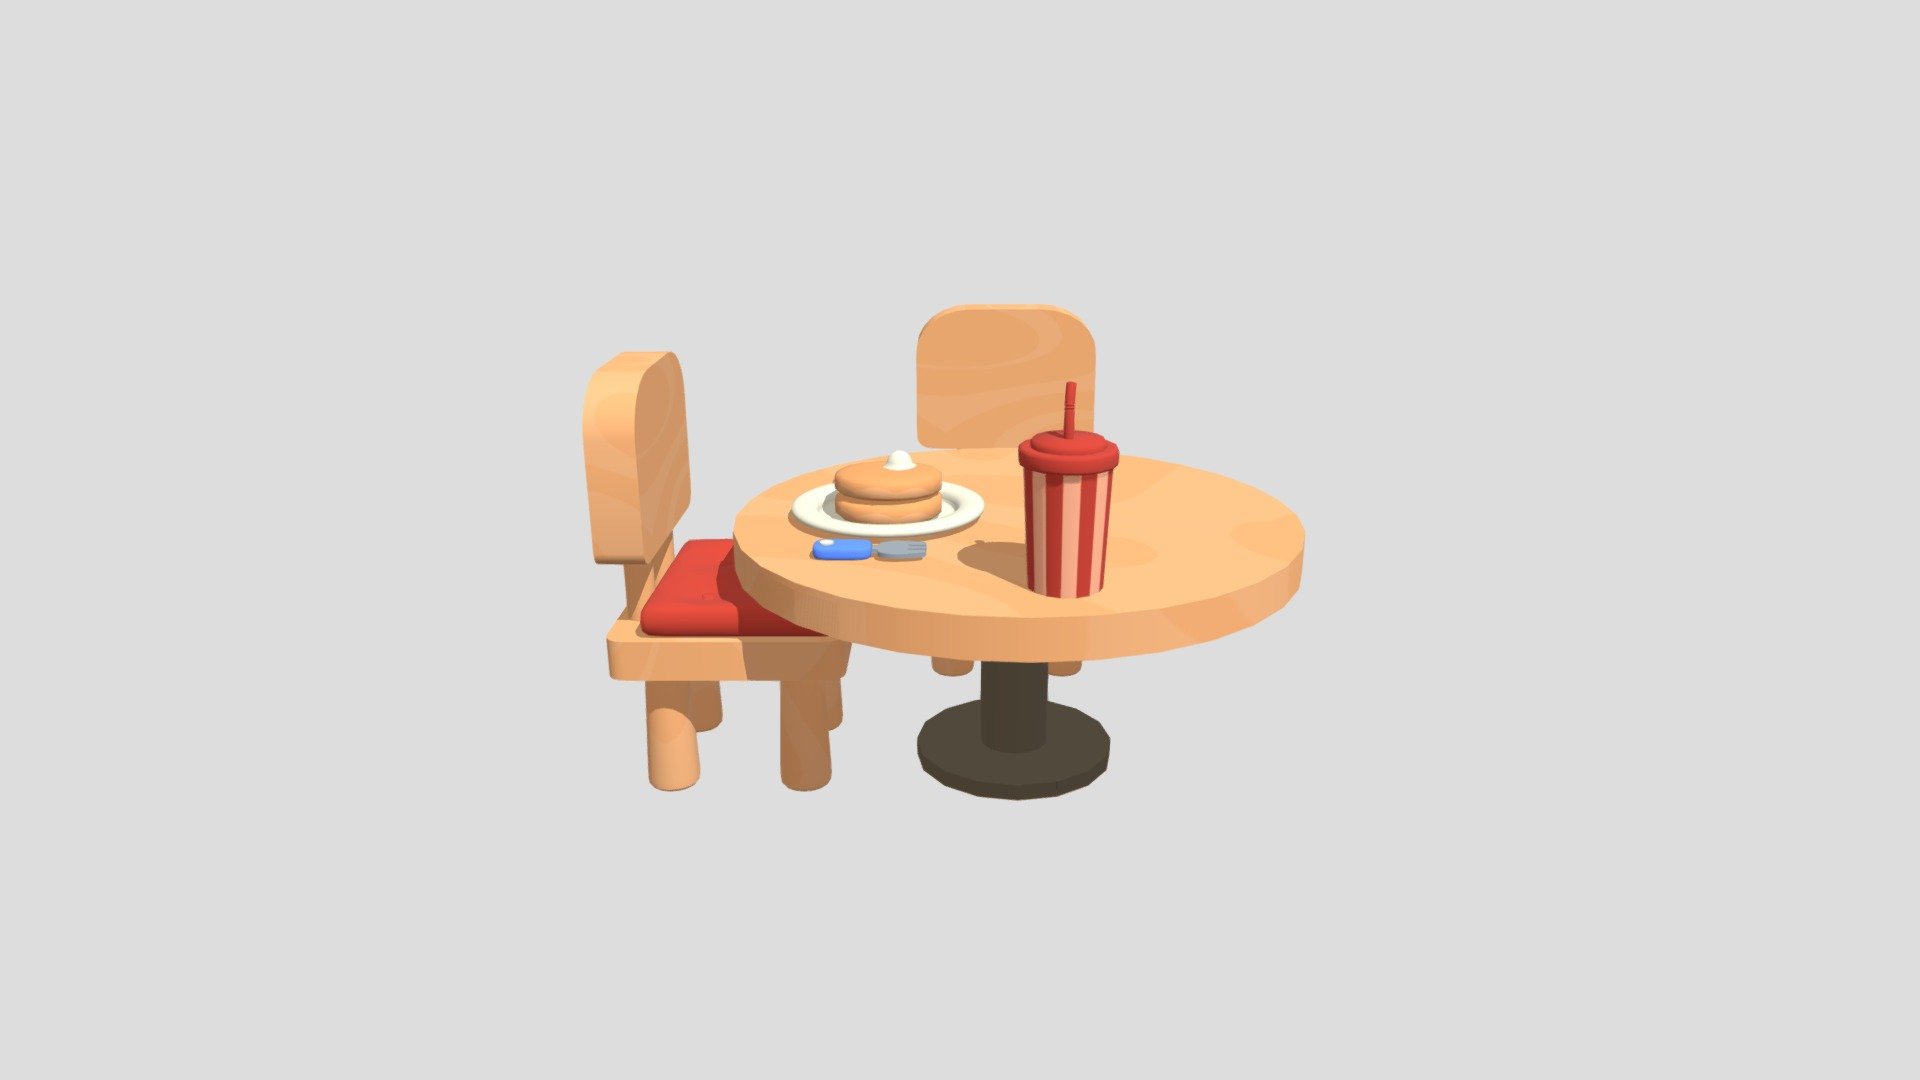 Made for a larger project that can be found on my profile.

Includes: Table, Chair, Pillow, Plate, Knife, Fork, Pancakes, Cream, Smoothie 3d model